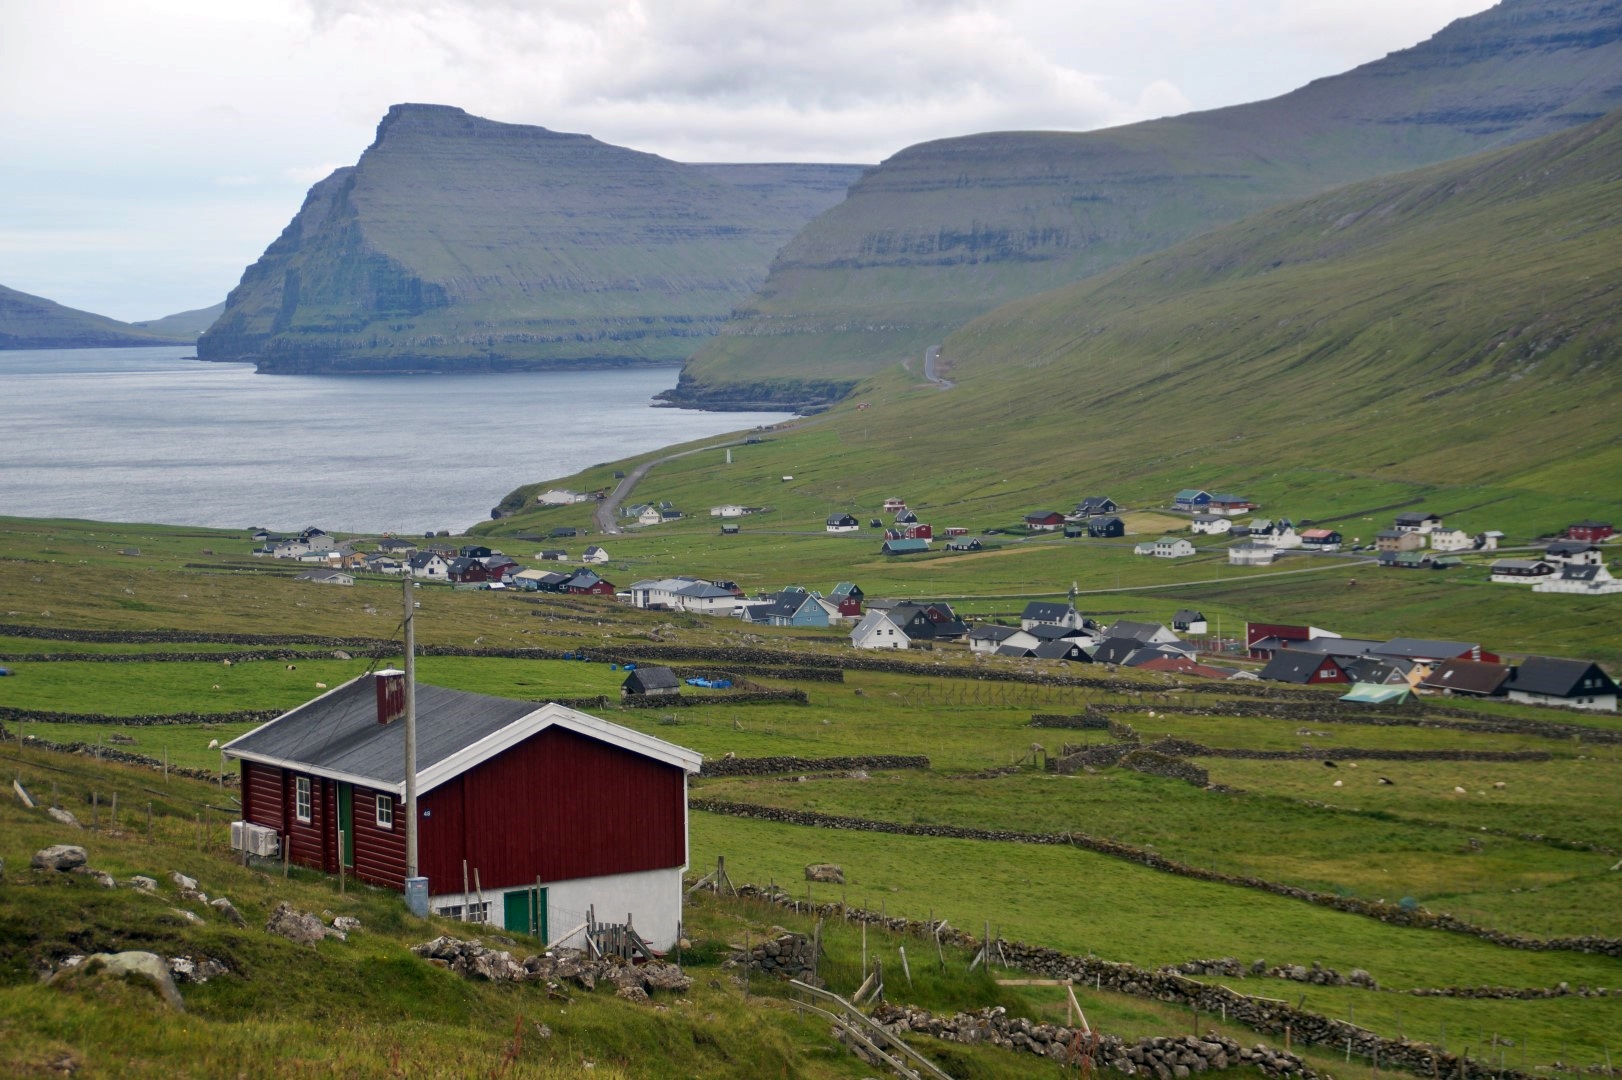 Back in Viðareiði - the red house is the northernmost house on the Faroe Islands